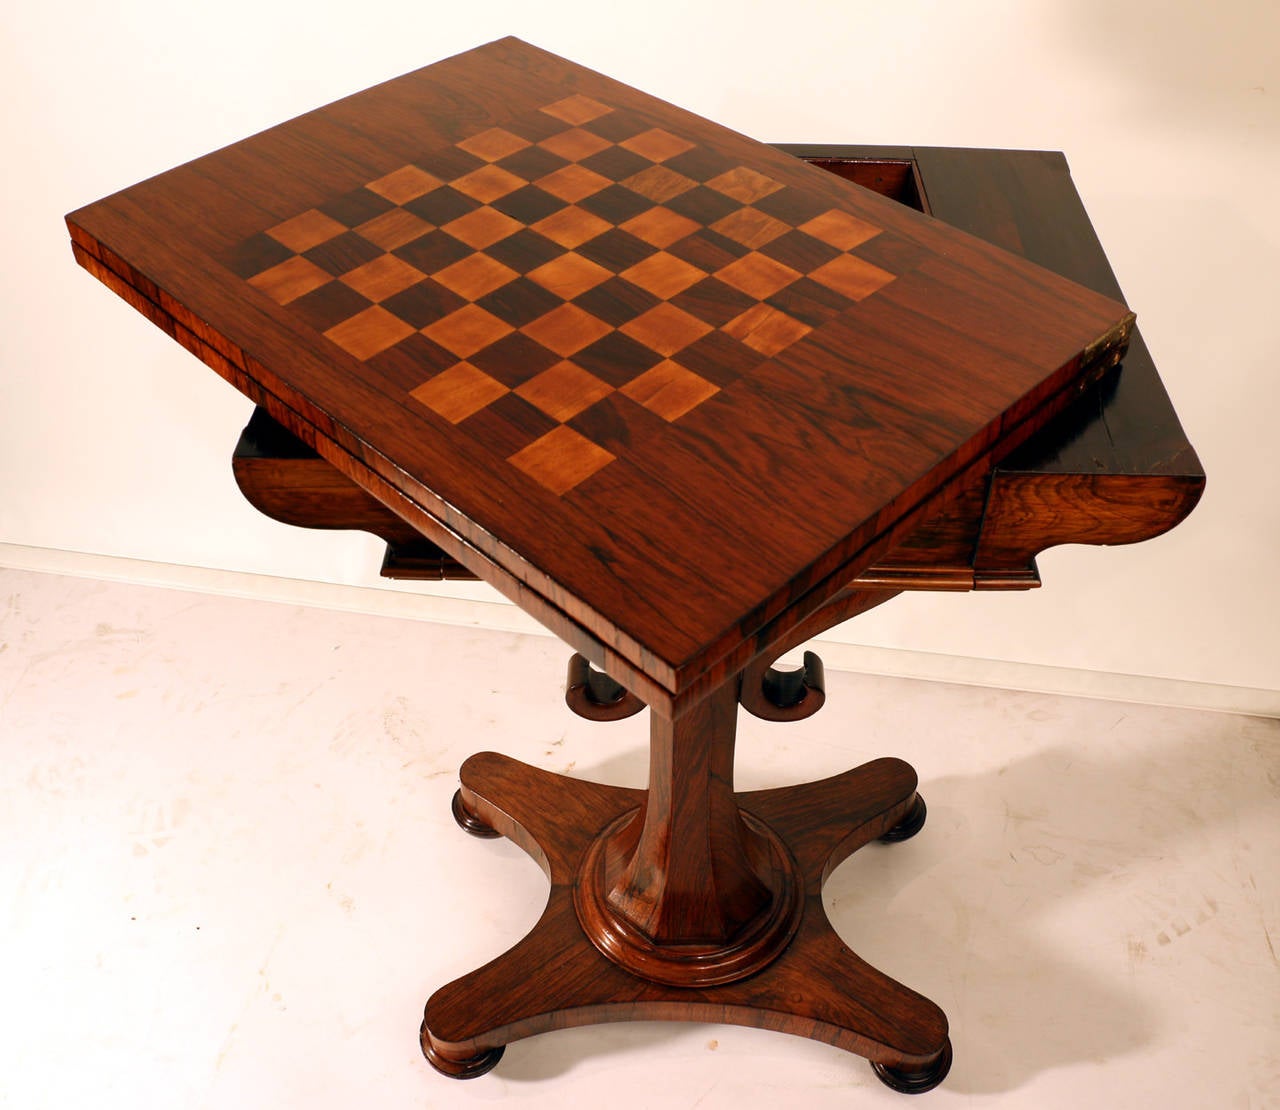 A William IV rosewood fold-over chess and card table, the surface inlaid with a board for chess, and opening to reveal a green baize surface for cards, with storage compartment beneath, the whole elegantly supported by a tapering and paneled column